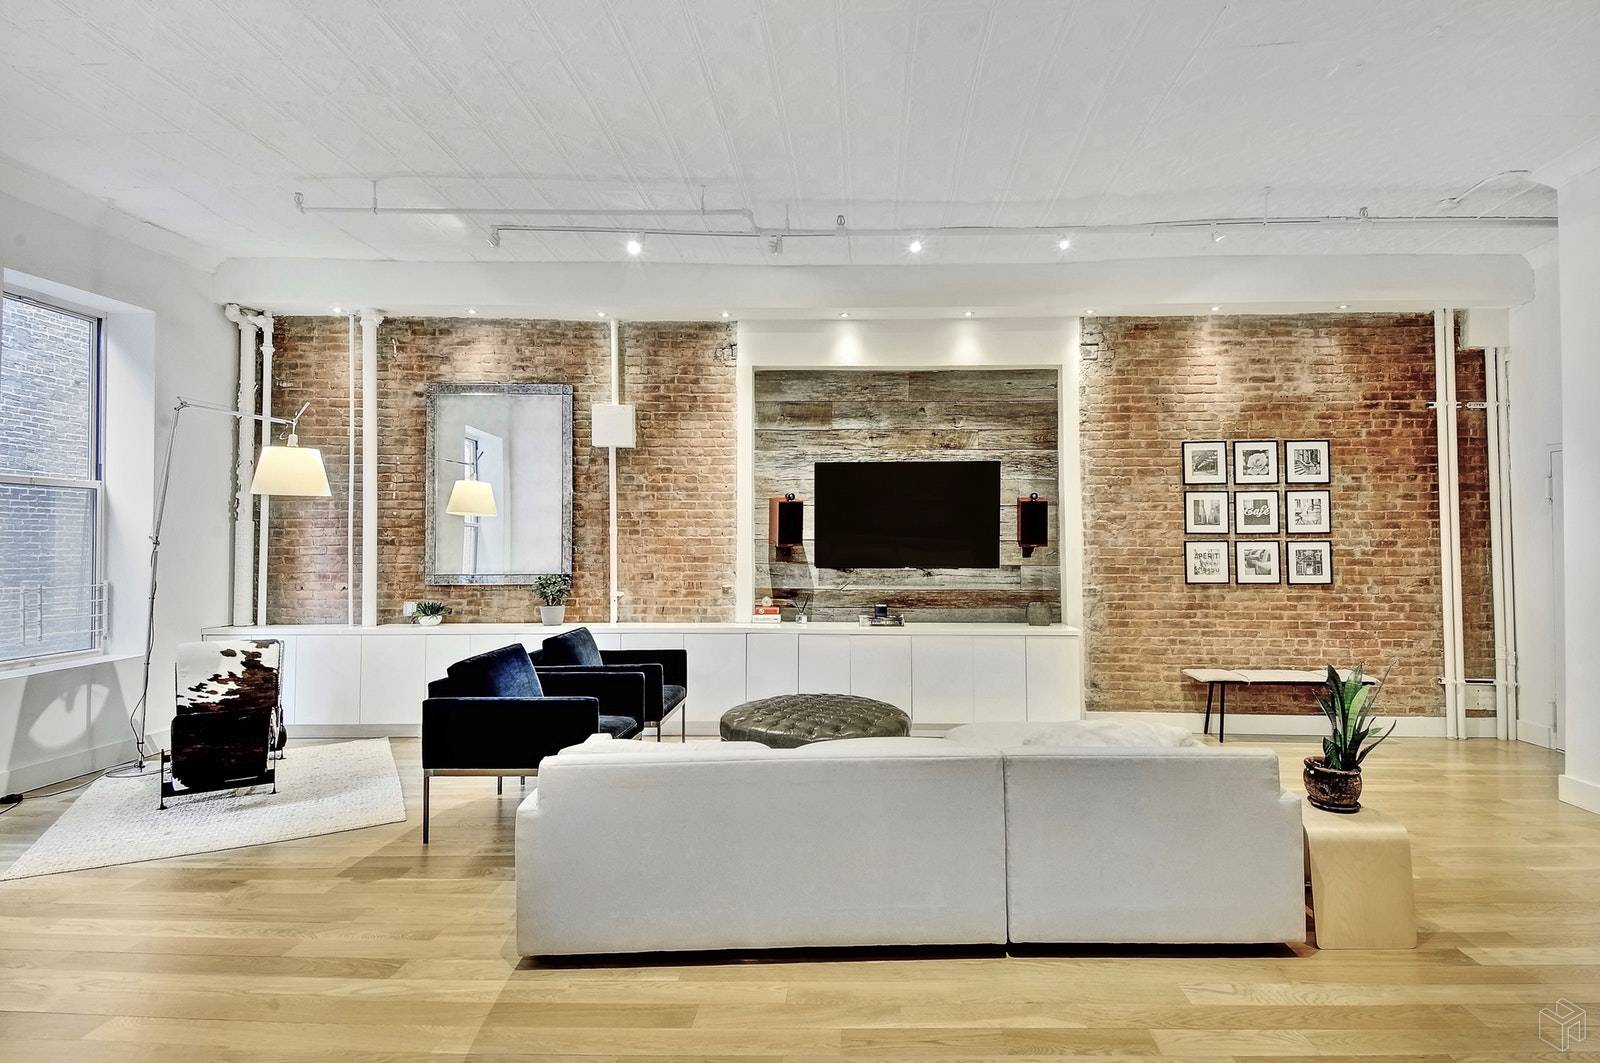 BRAND NEW LISTING ! Rare opportunity to own and occupy the most elusive and coveted breed of downtown New York City homes a flawlessly renovated moderate sized historic loft with ...